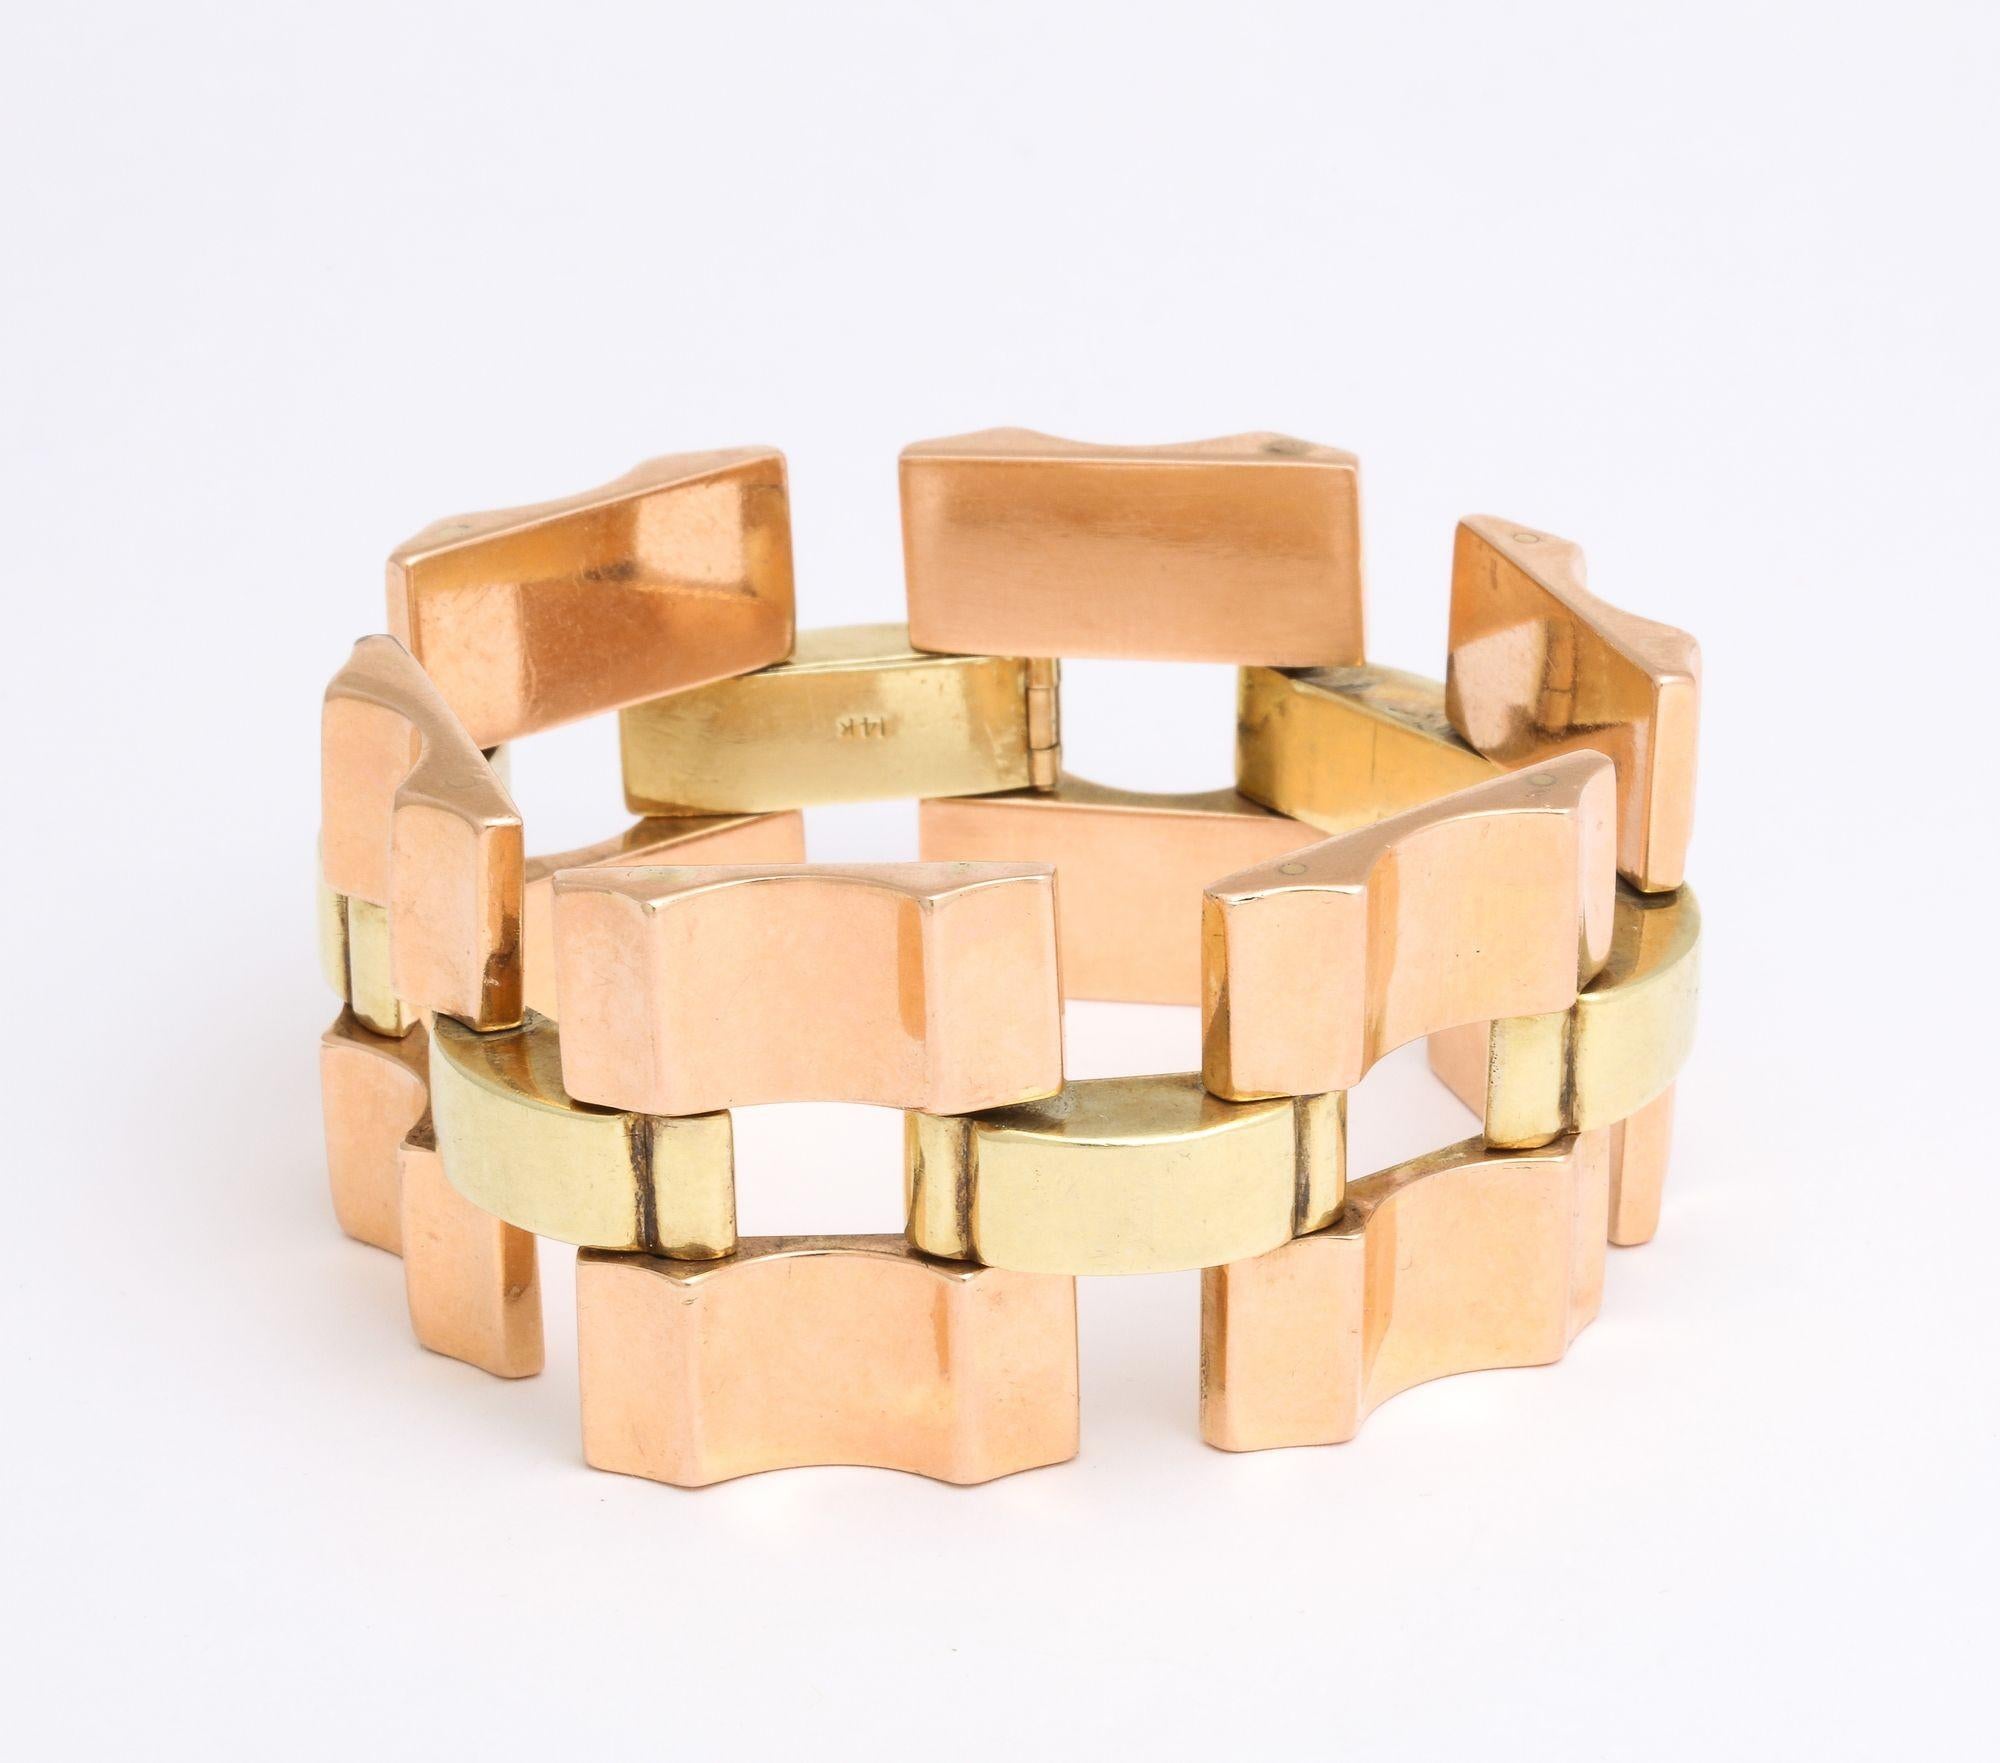 A classic  Exceptional Retro  Wide Open Link Bracelet in 14k Rose and Yellow Gold. A statement piece and very wearable.